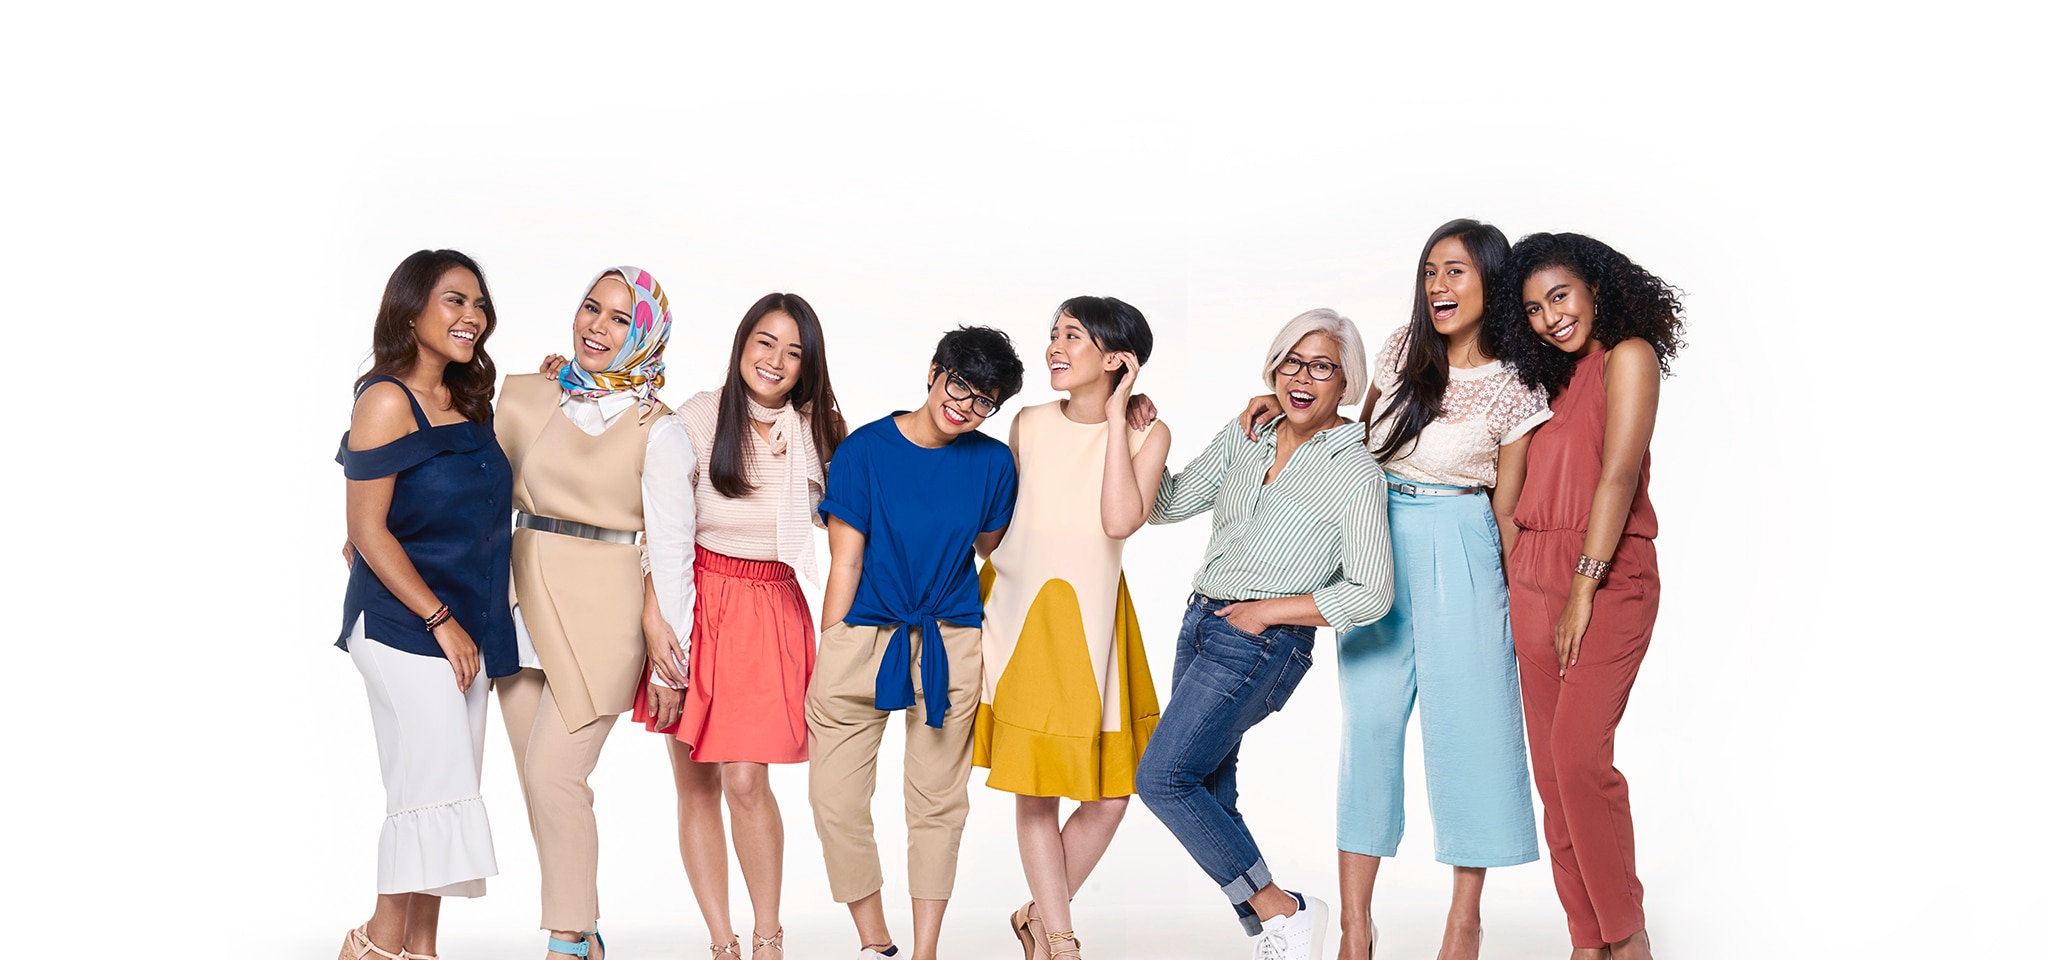 #IamRealBeauty – casting the diverse women of Malaysia for the next Dove campaign